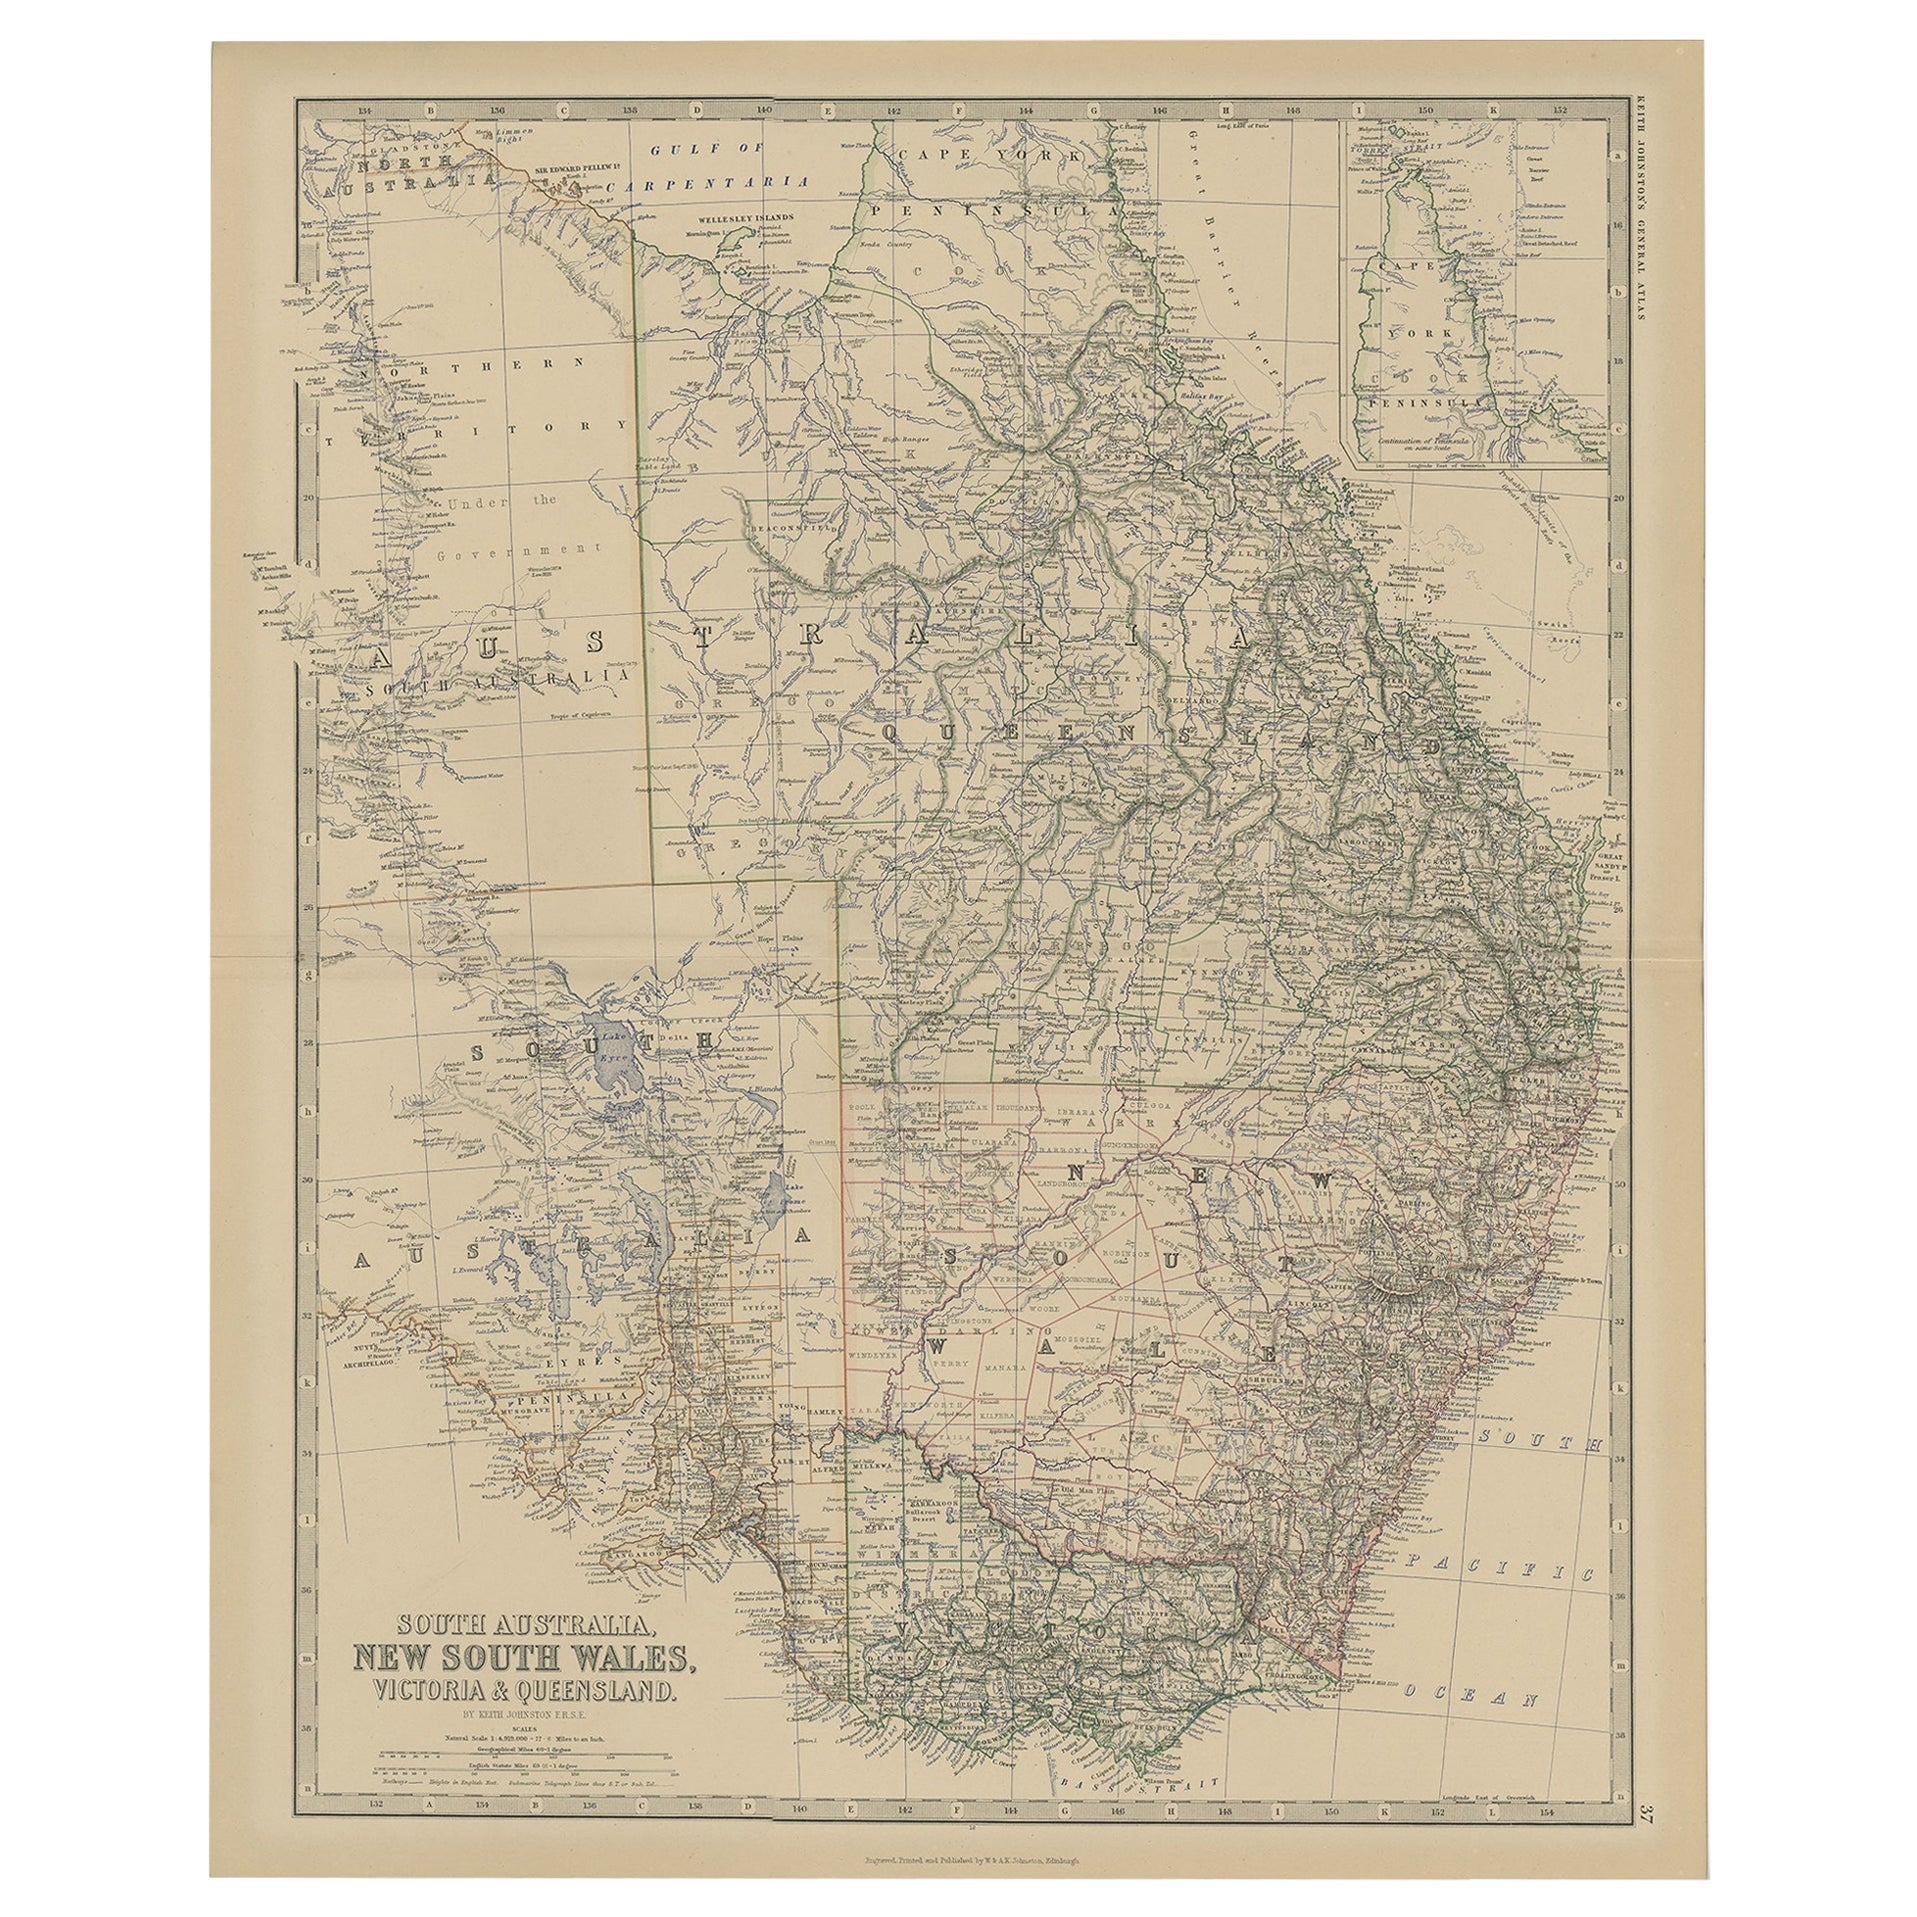 Old Map of Southern Australia, with an Inset Map of Cape York Peninsula, 1882 For Sale